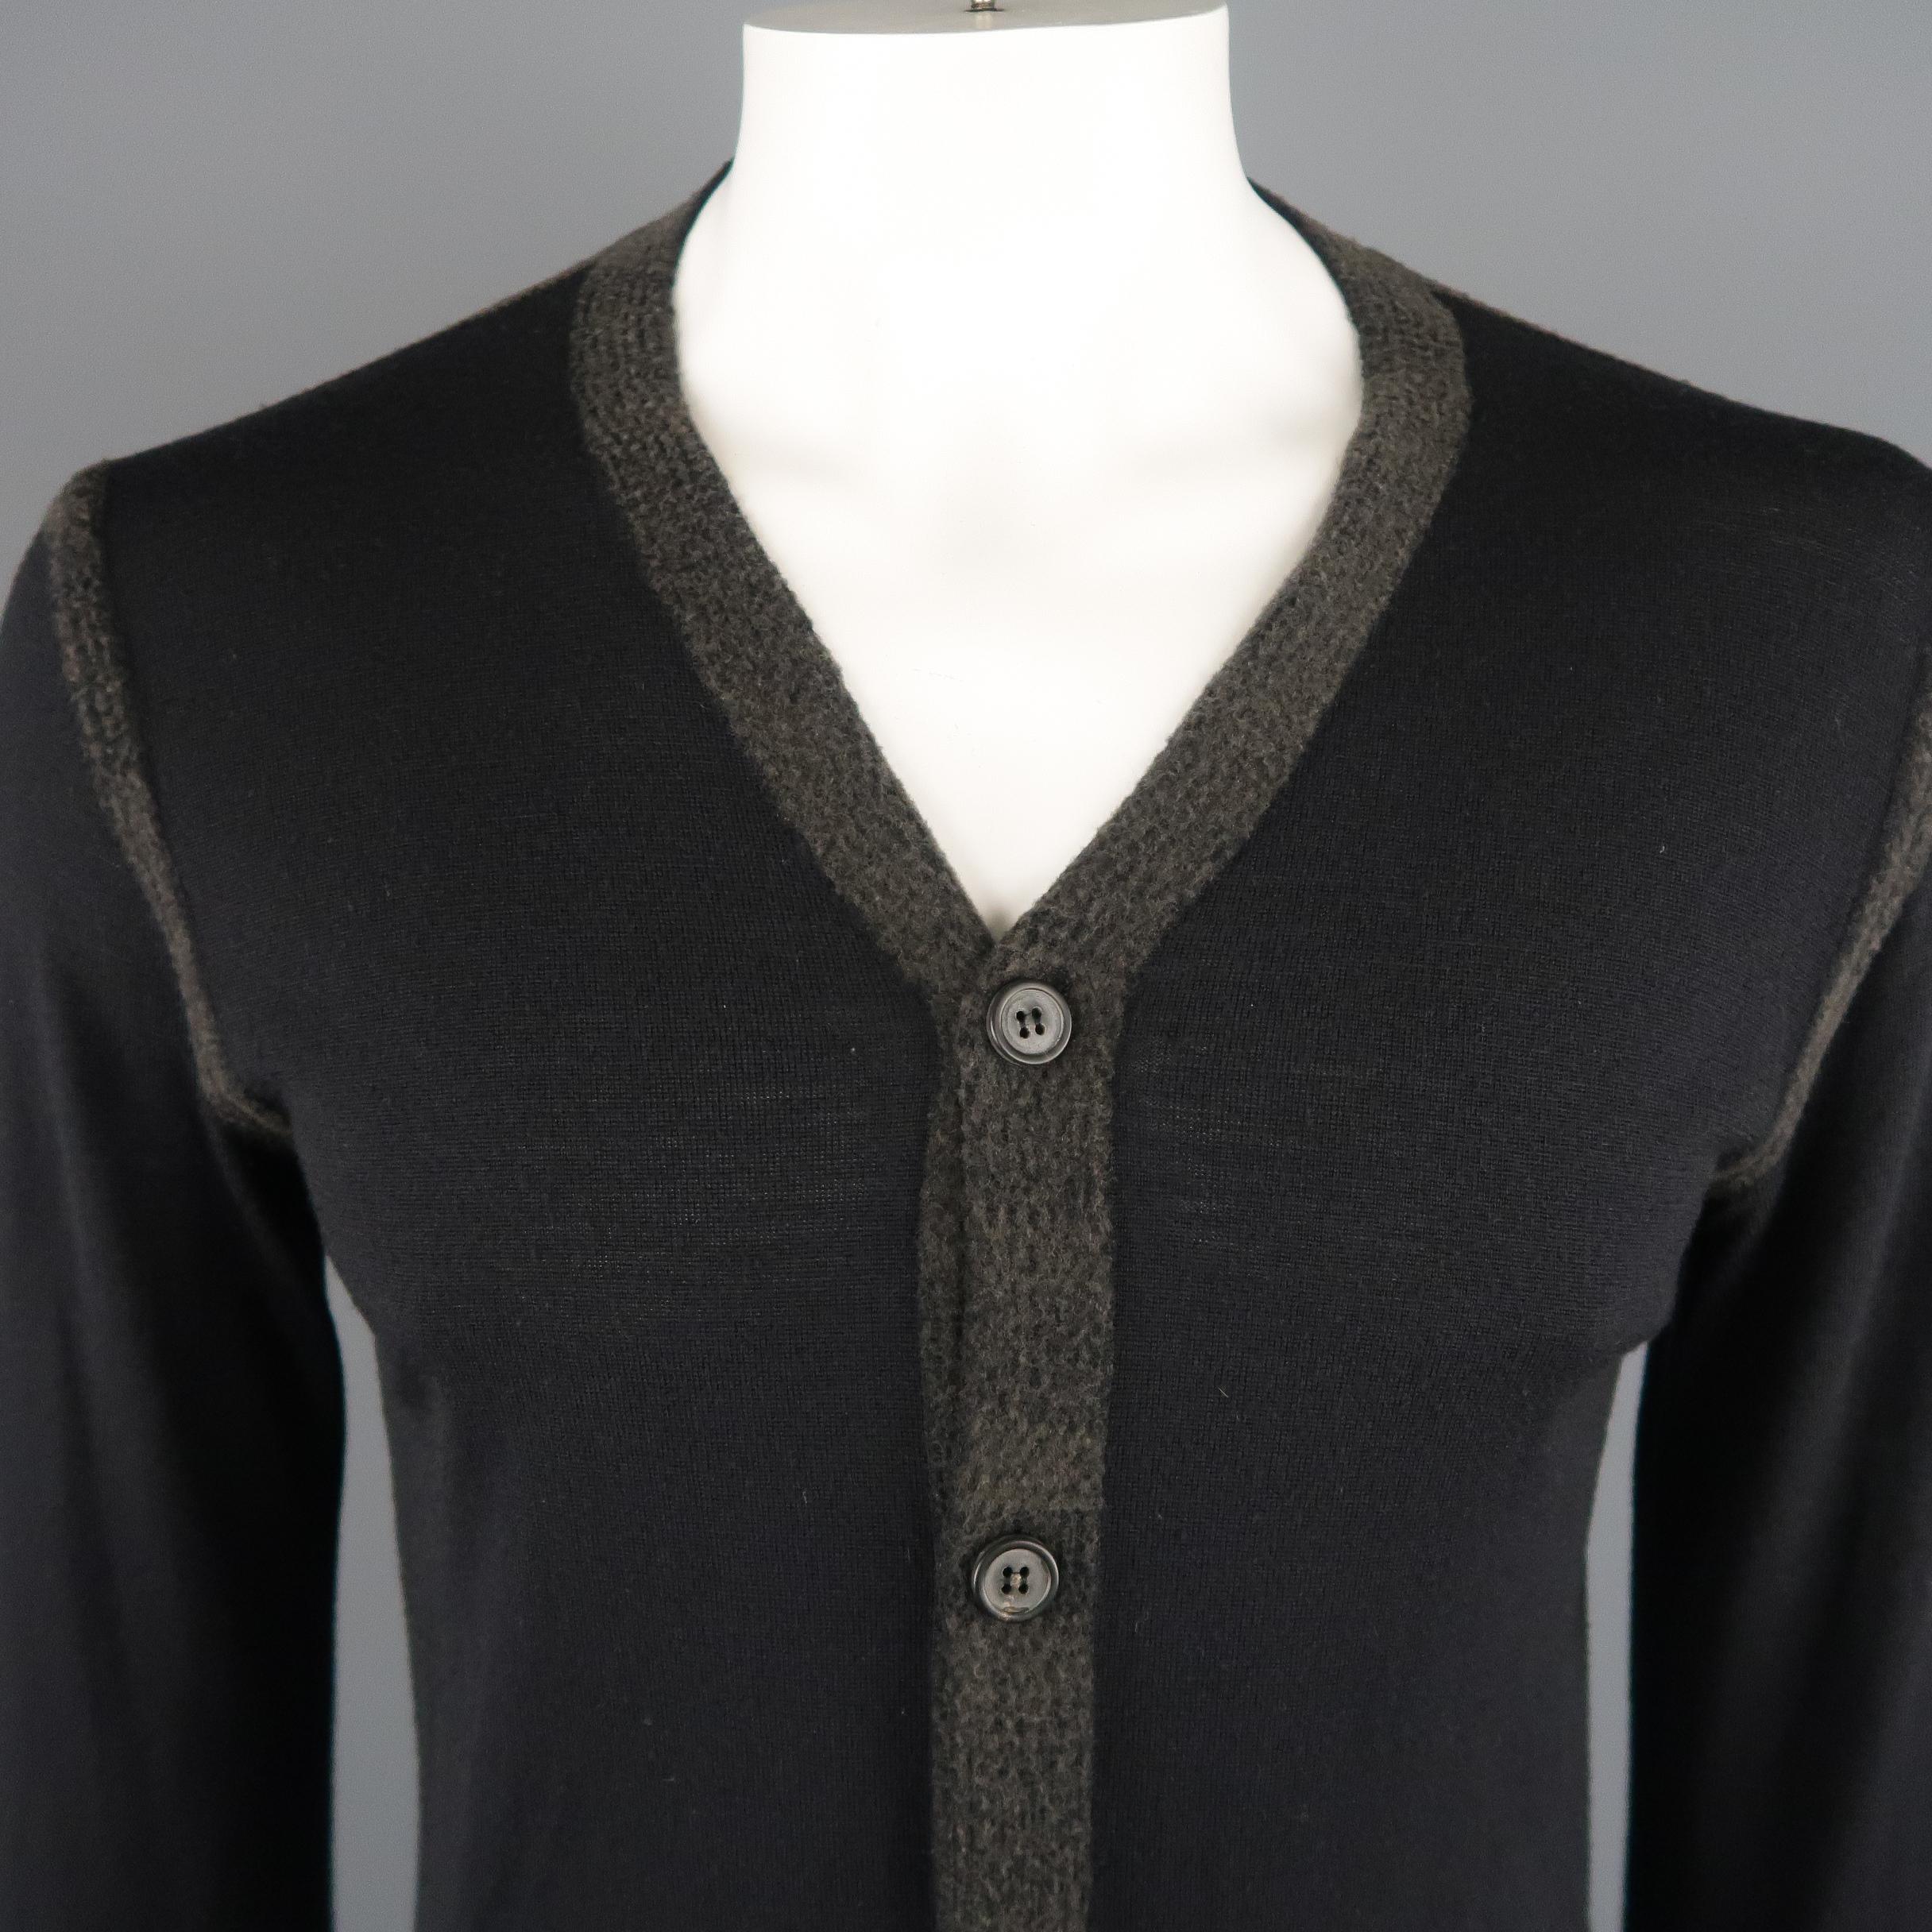 LANVIN Cardigan Sweater comes in a black tone in a solid wool material, with a charcoal trim, buttoned, and with ribbed cuffs and hem. Made in Italy.
 
Excellent Pre-Owned Condition.
Marked: L IT
 
Measurements:
 
Shoulder: 17.5 in.
Chest: 42